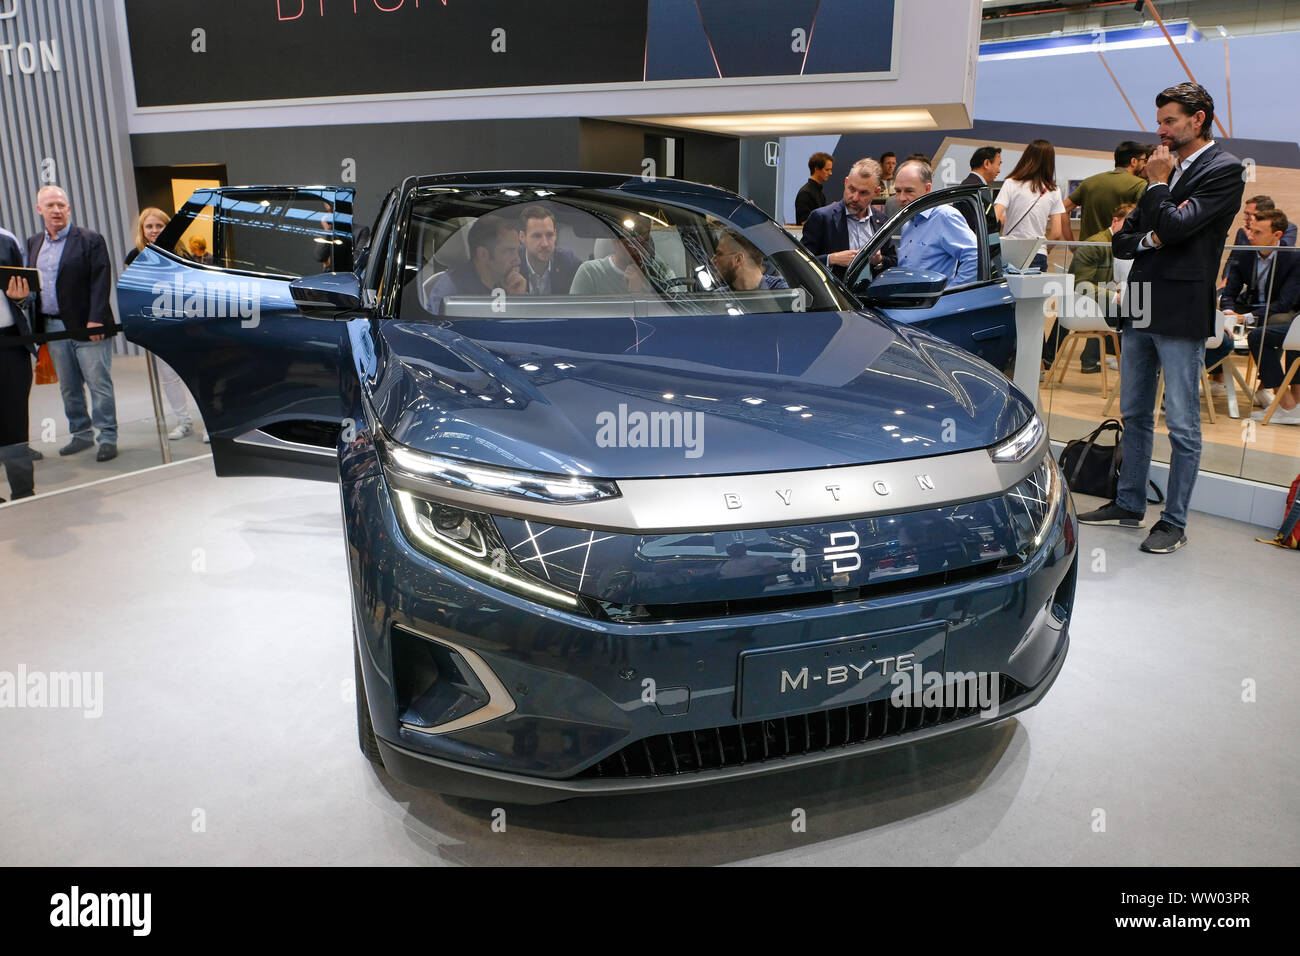 Chinese carmacer BYTON with his modelI M-BYTE at the AA 2019 international automobile show, Frankfurt am Main, Germany Stock Photo